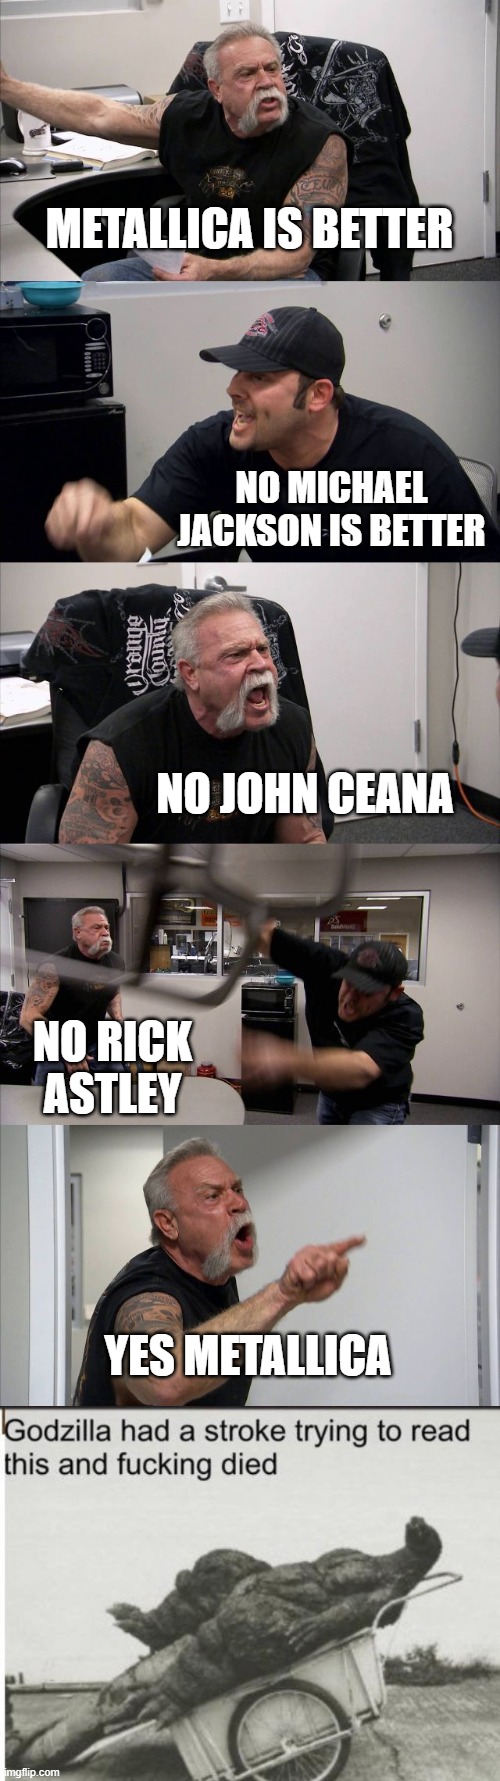 A USELESS ARGUMENT | METALLICA IS BETTER; NO MICHAEL JACKSON IS BETTER; NO JOHN CEANA; NO RICK ASTLEY; YES METALLICA | image tagged in memes,american chopper argument,godzilla | made w/ Imgflip meme maker